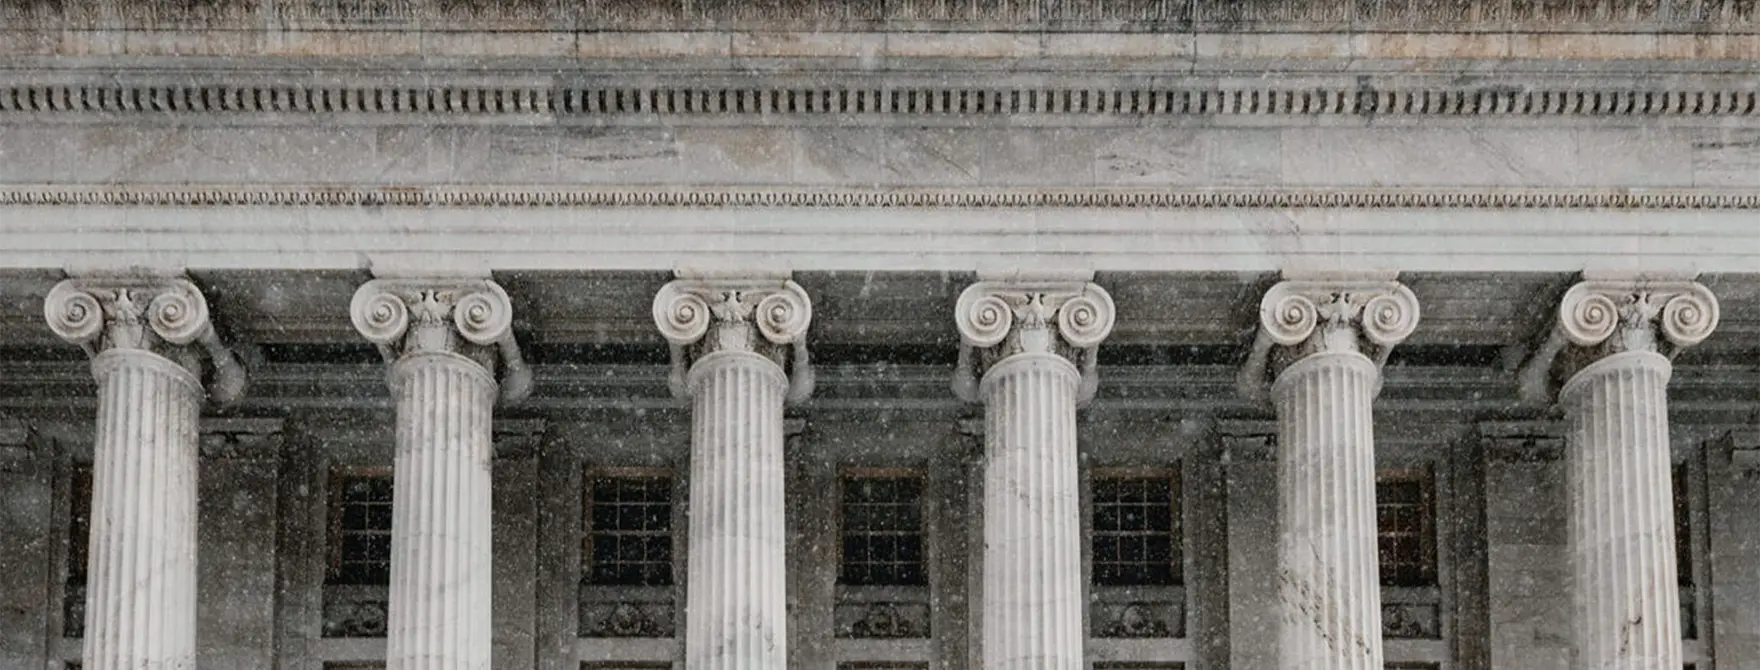 Columns from a courthouse